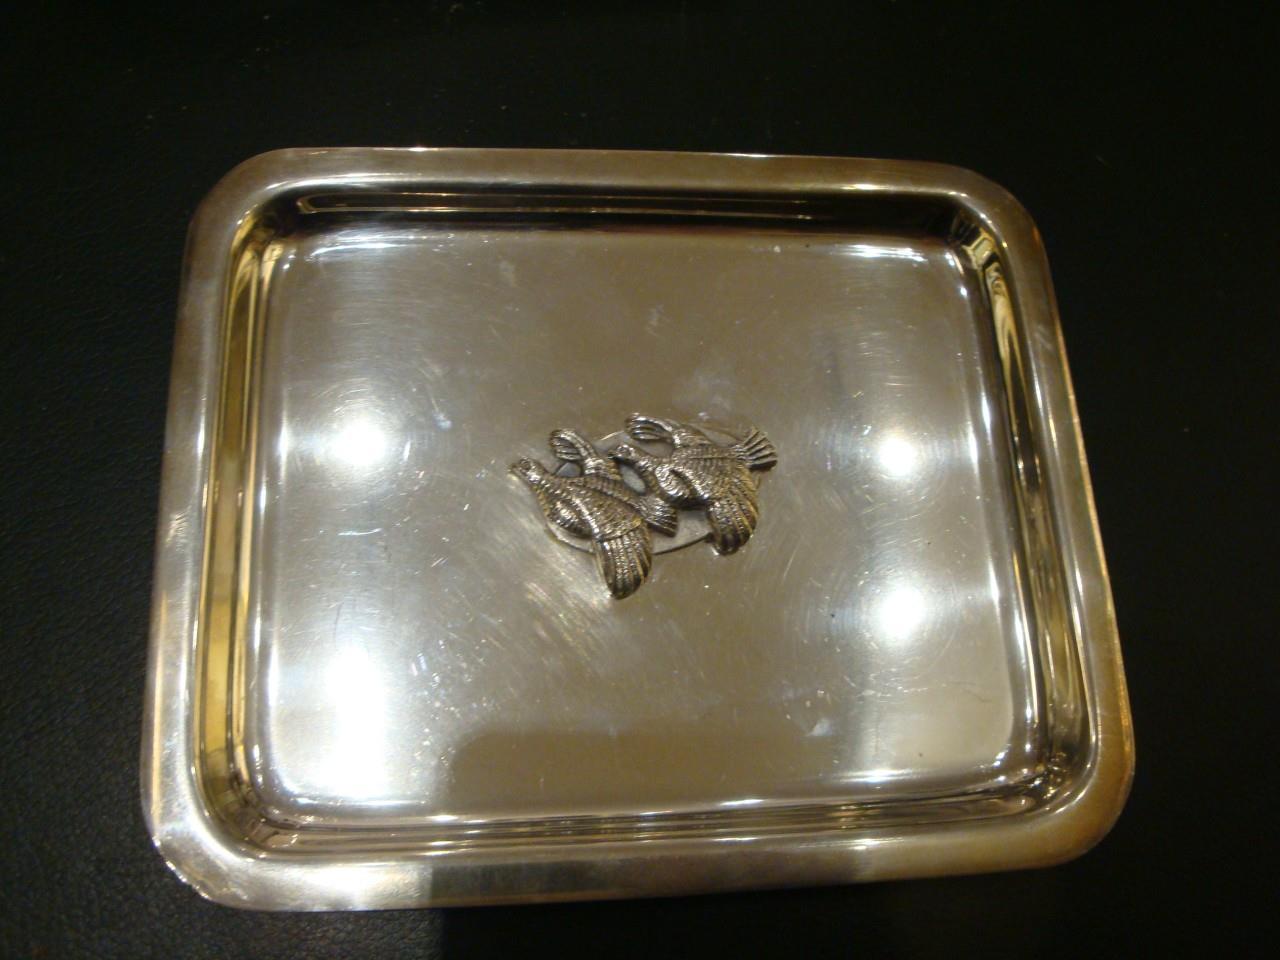 The Following Item we are offering is A Magnificent Rare Holland & Holland Sterling Server Dish Tray. Beautifully decorated with Flying Geese. Signed and Stamped on Bottom. Provenance: Taken out of A Private Collection. Comes with Certified